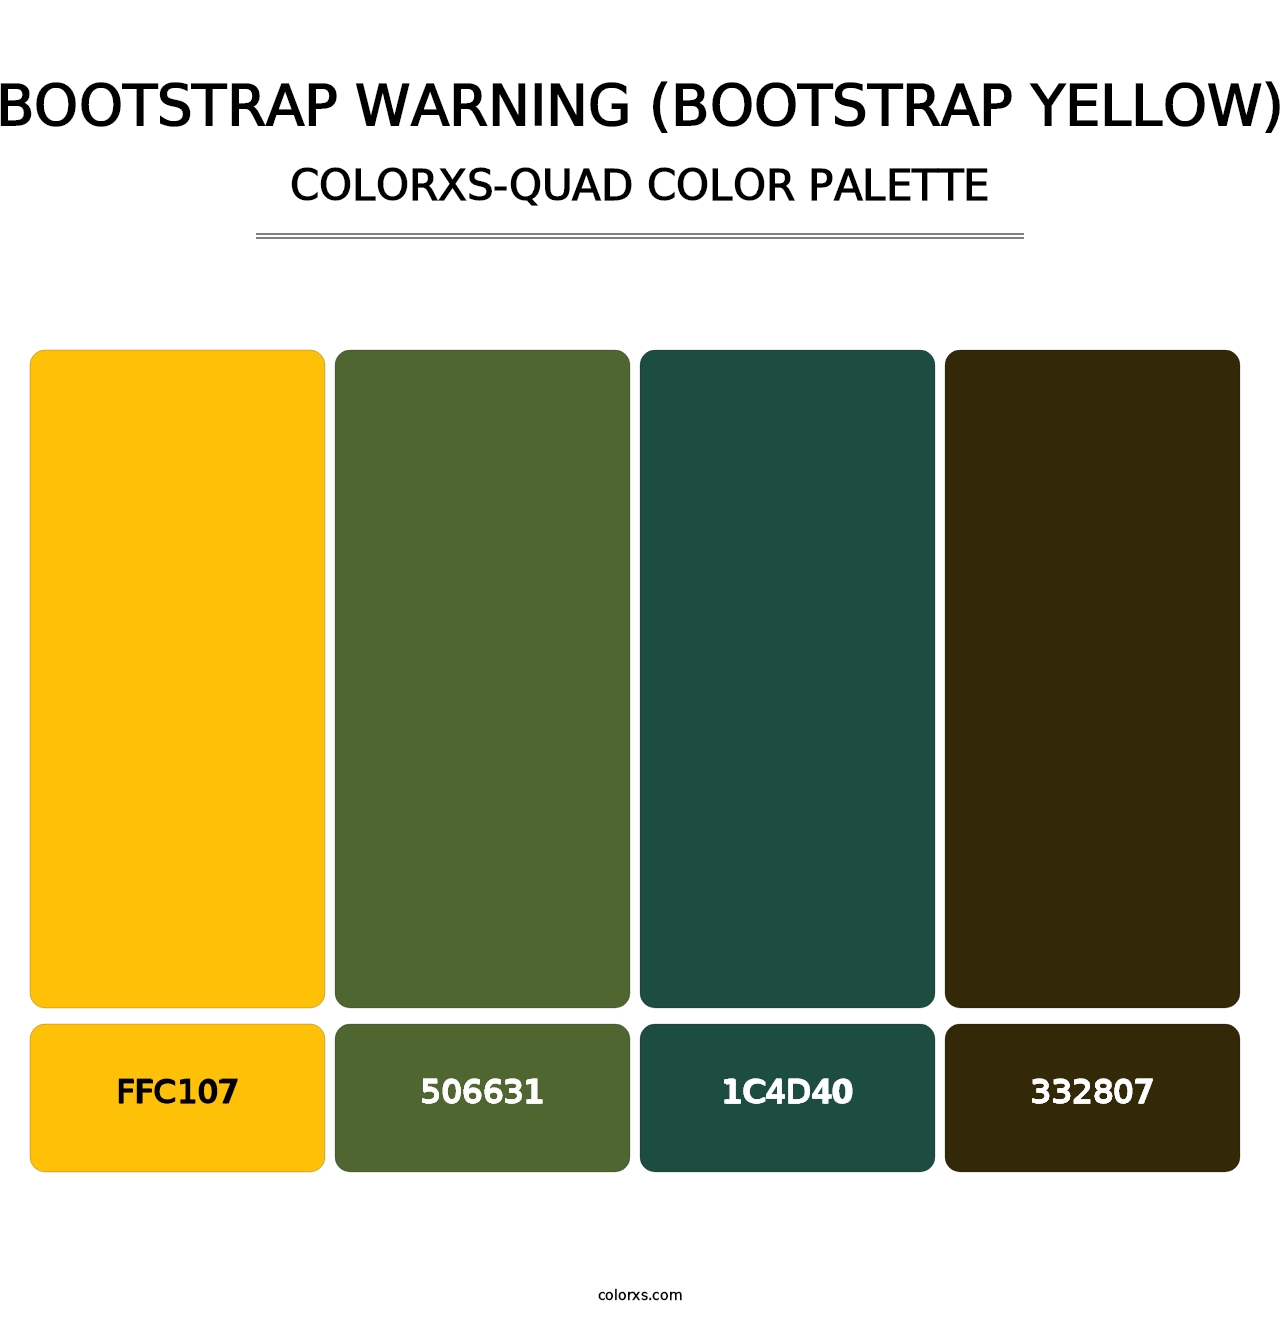 Bootstrap Warning (Bootstrap Yellow) - Colorxs Quad Palette